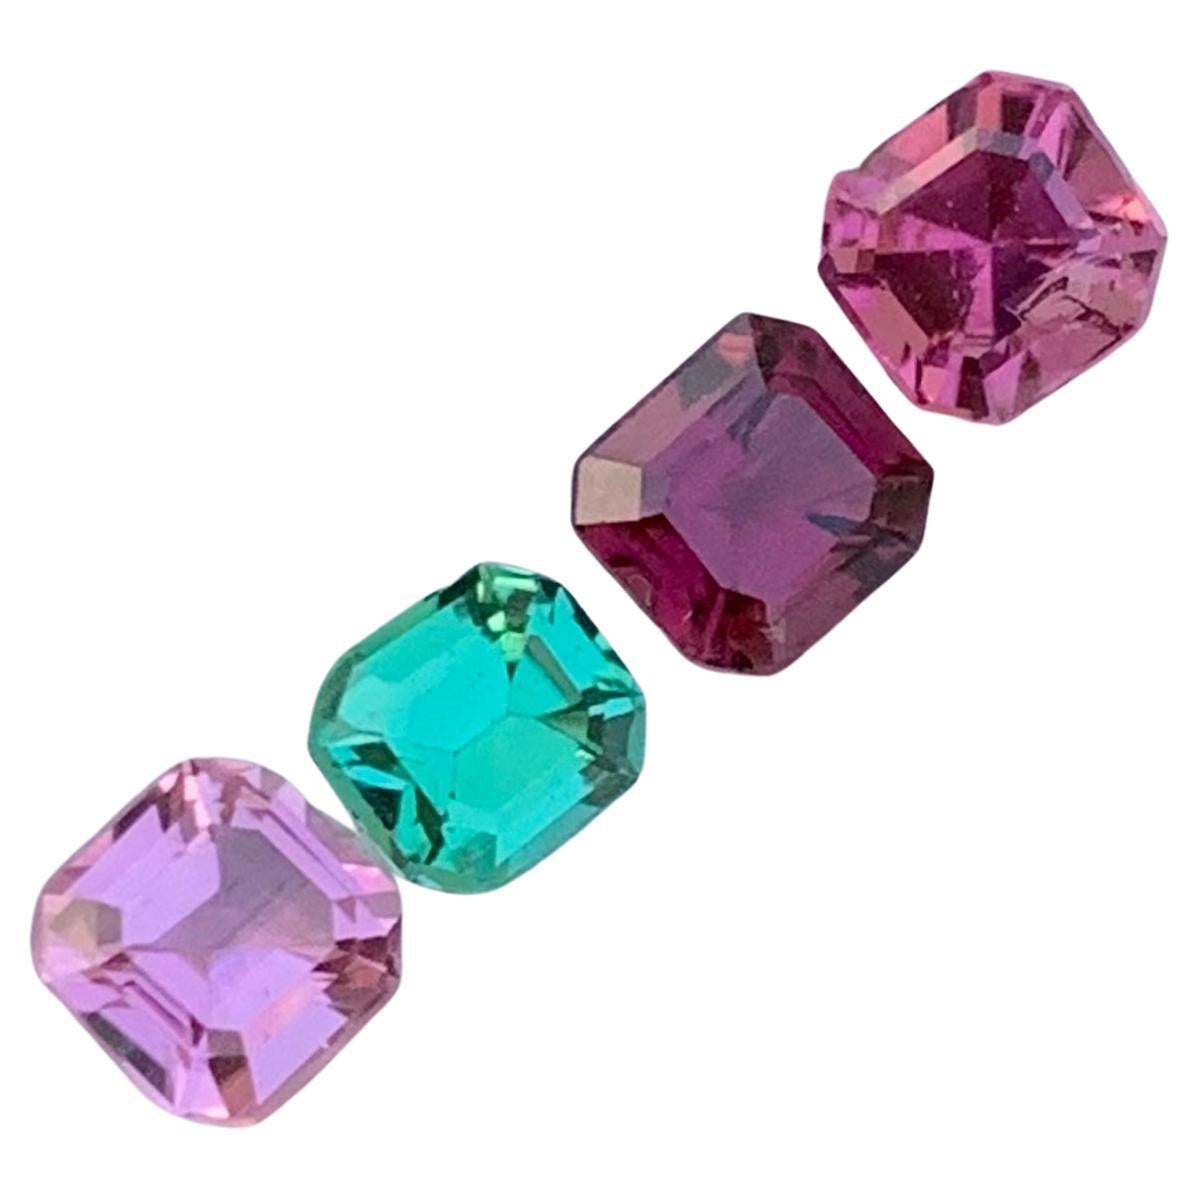 Gorgeous Clean Faceted Tourmaline Lot Set For Jewelry Making 2.70 Carats 